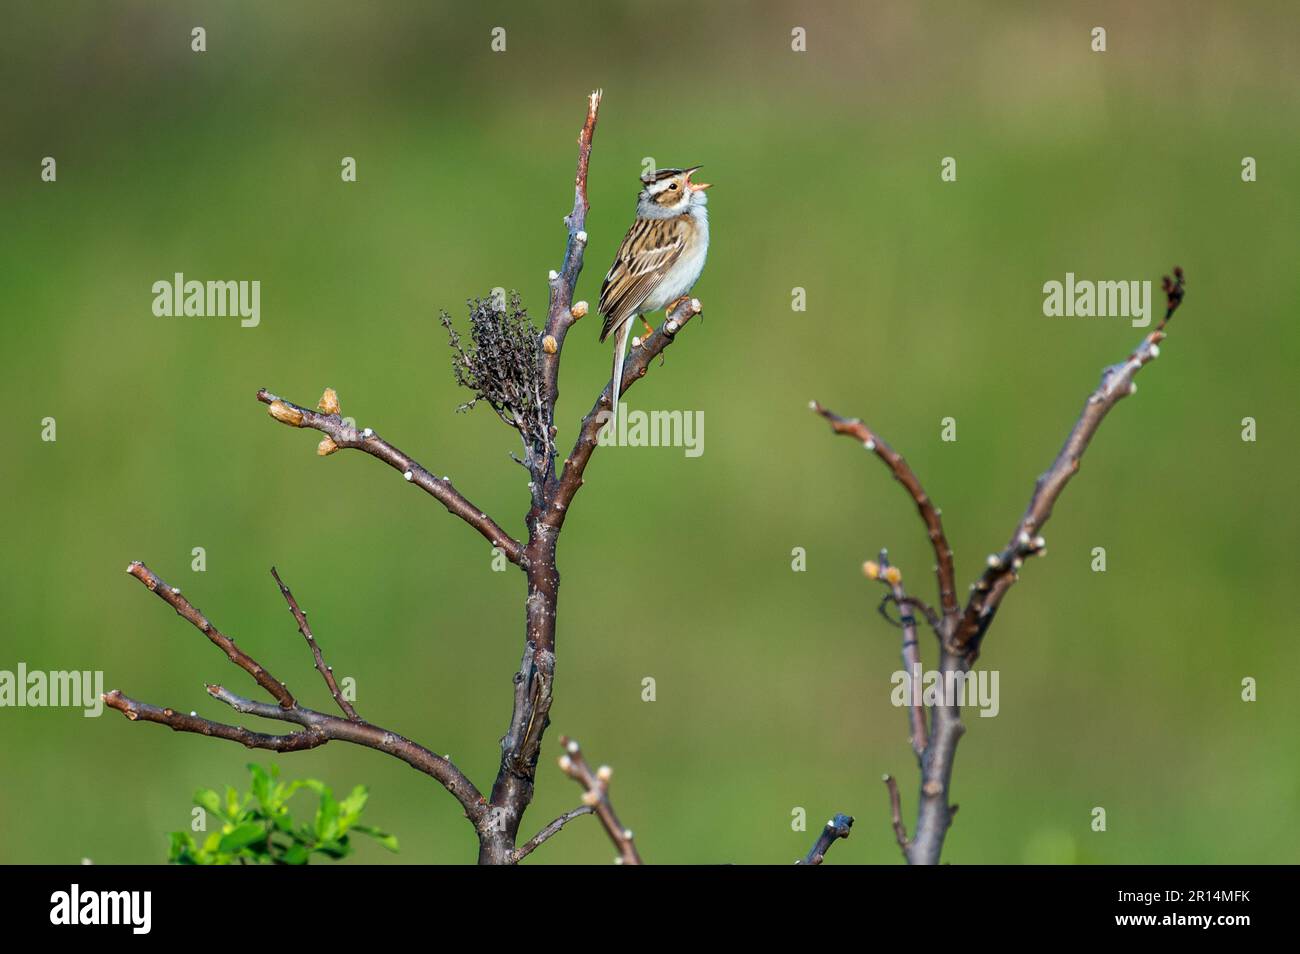 Clay-colord Sparrow Singing While Perched on Branch Stock Photo